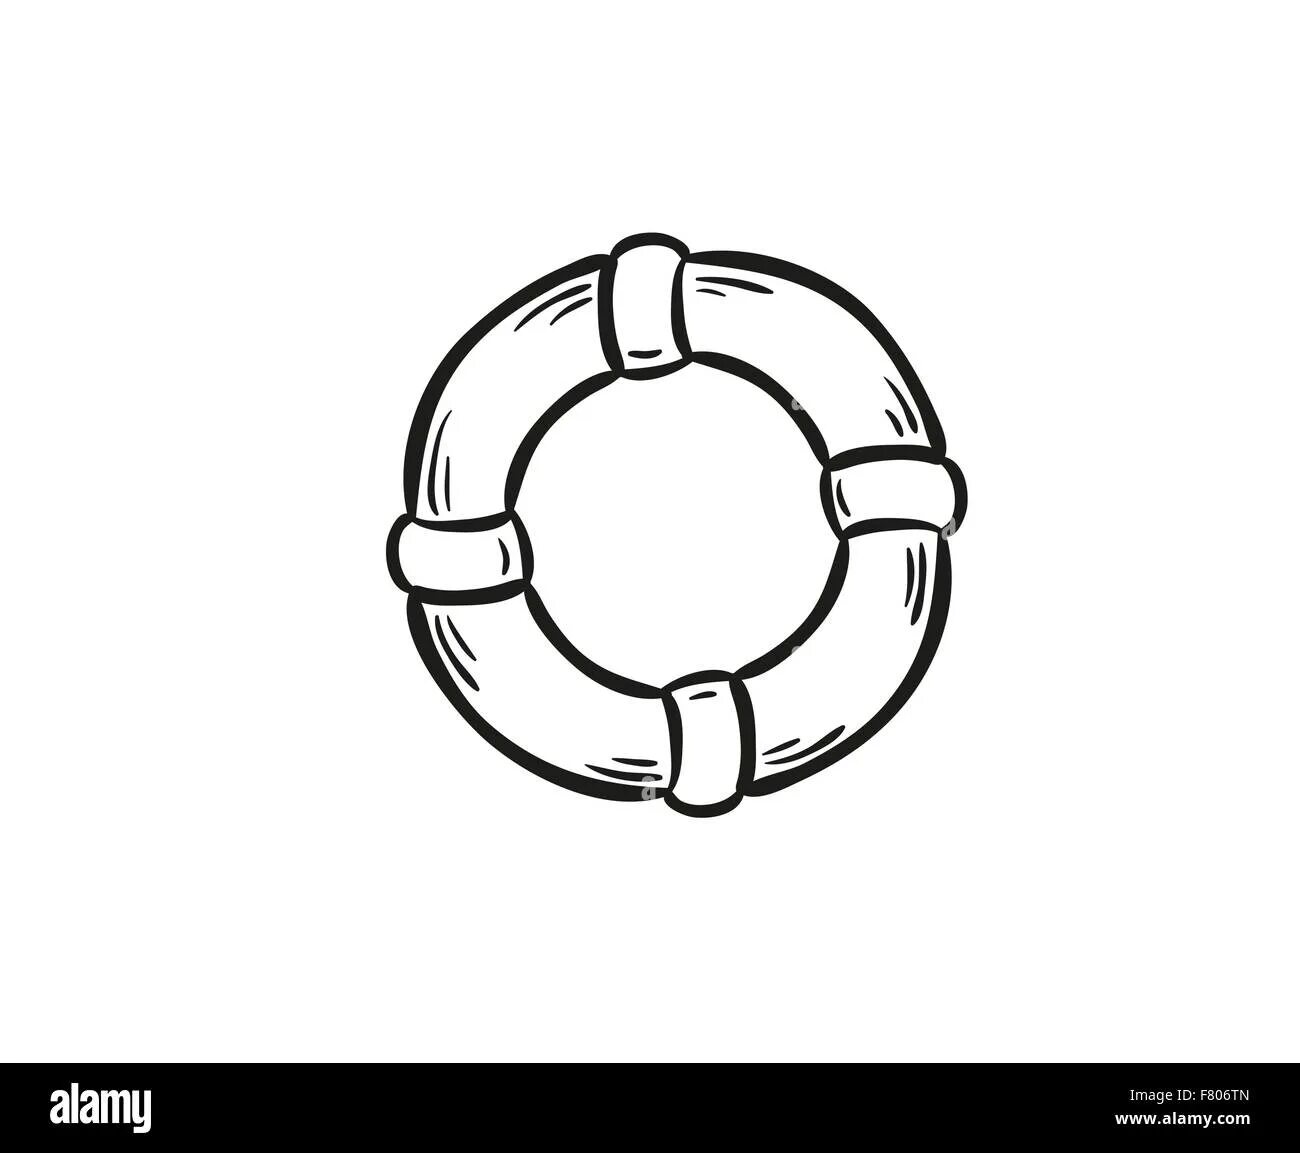 Lifebuoy coloring pages for kids